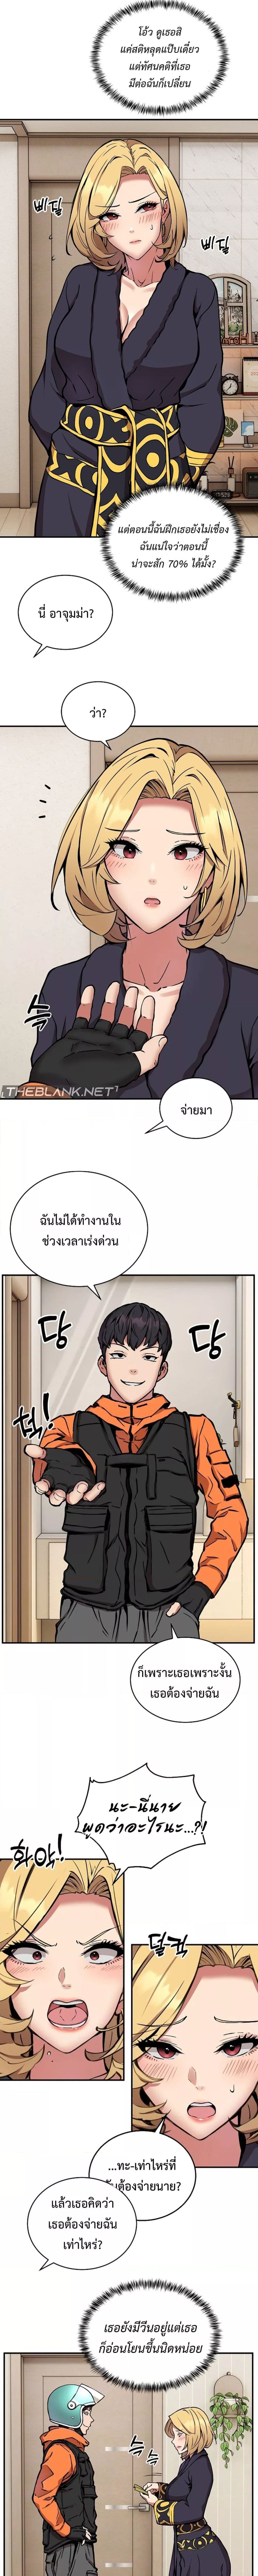 Driver in the New City ตอนที่ 11 ภาพ 7